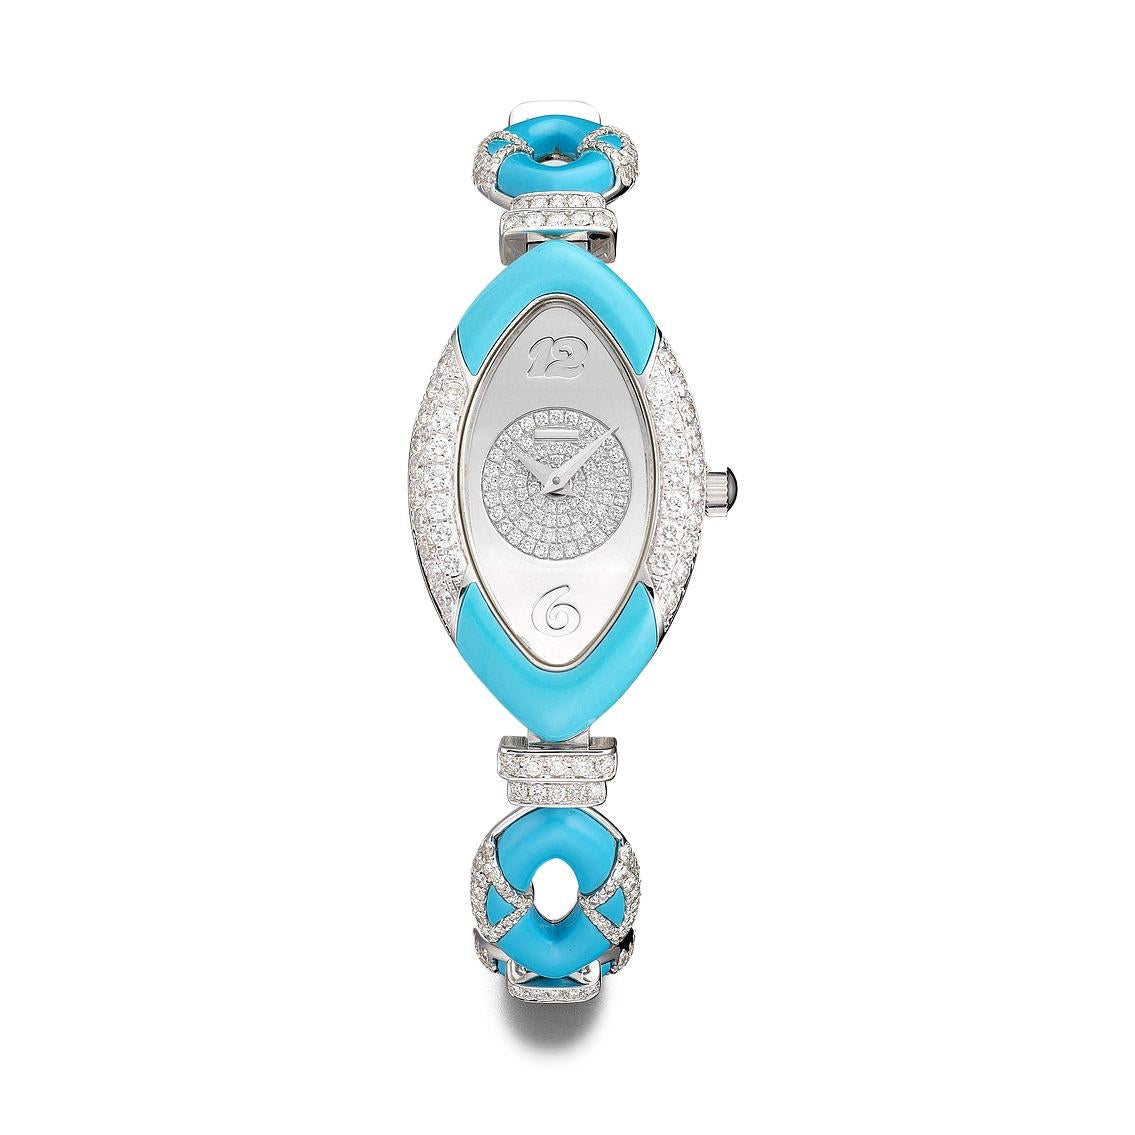 Watch in white gold 18kt set with 26 turqupoise 15.72 cts, case dial and bracelet set with 393 diamonds 3.42 cts quartz movement.      

We do not guarantee the functioning of this watch.         